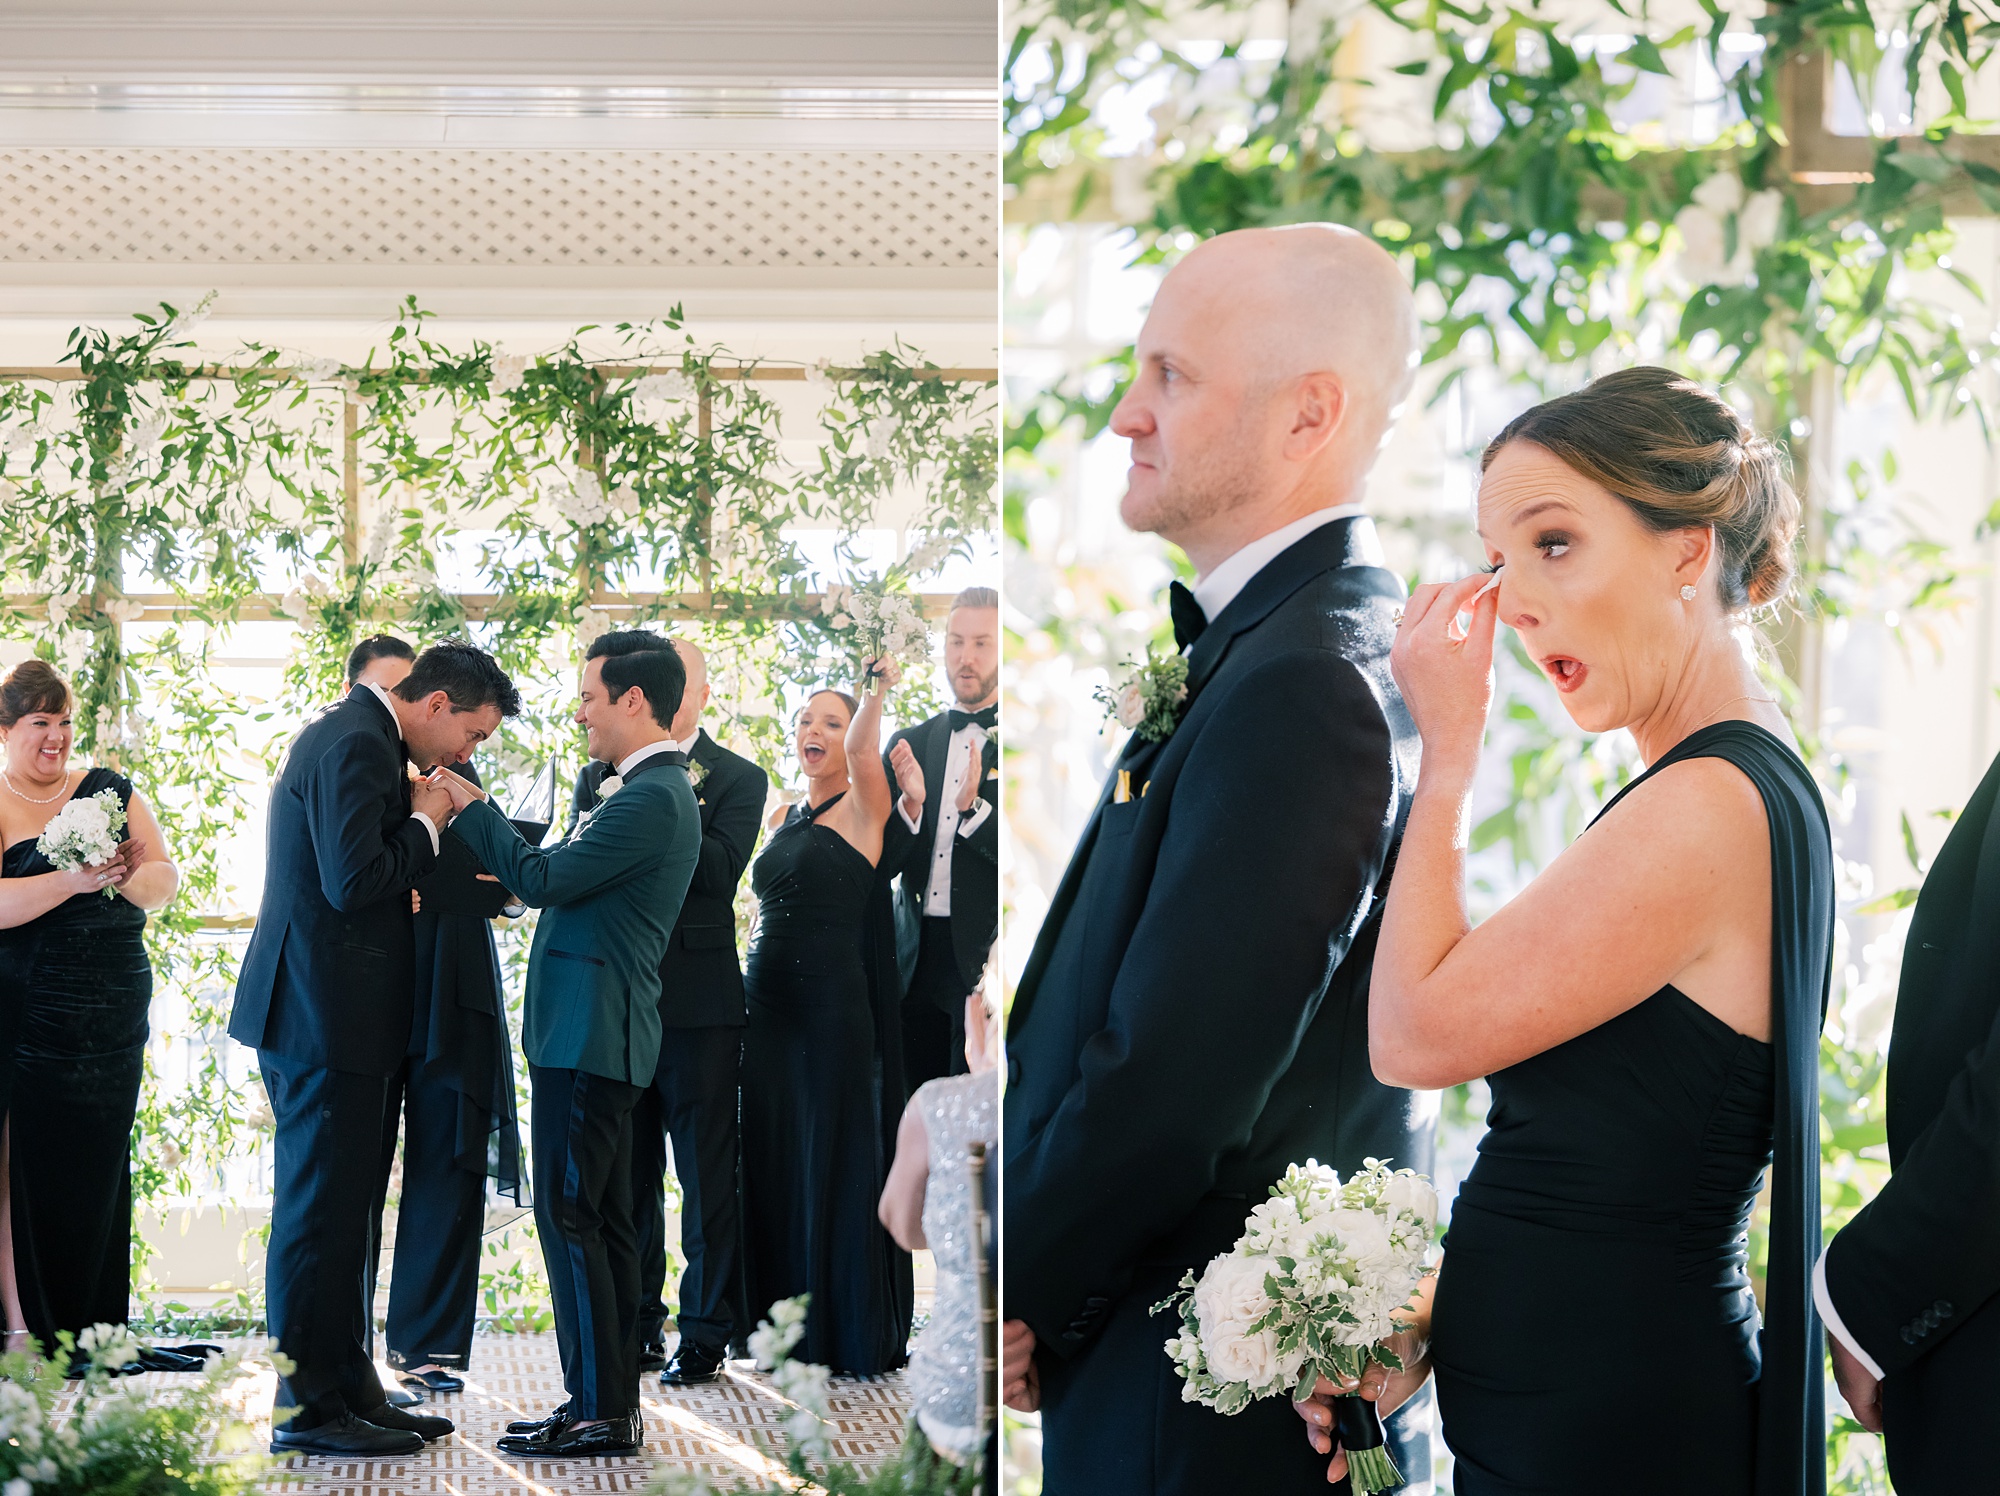 groom reads vows to husband during ceremony at the Hay Adams Hotel